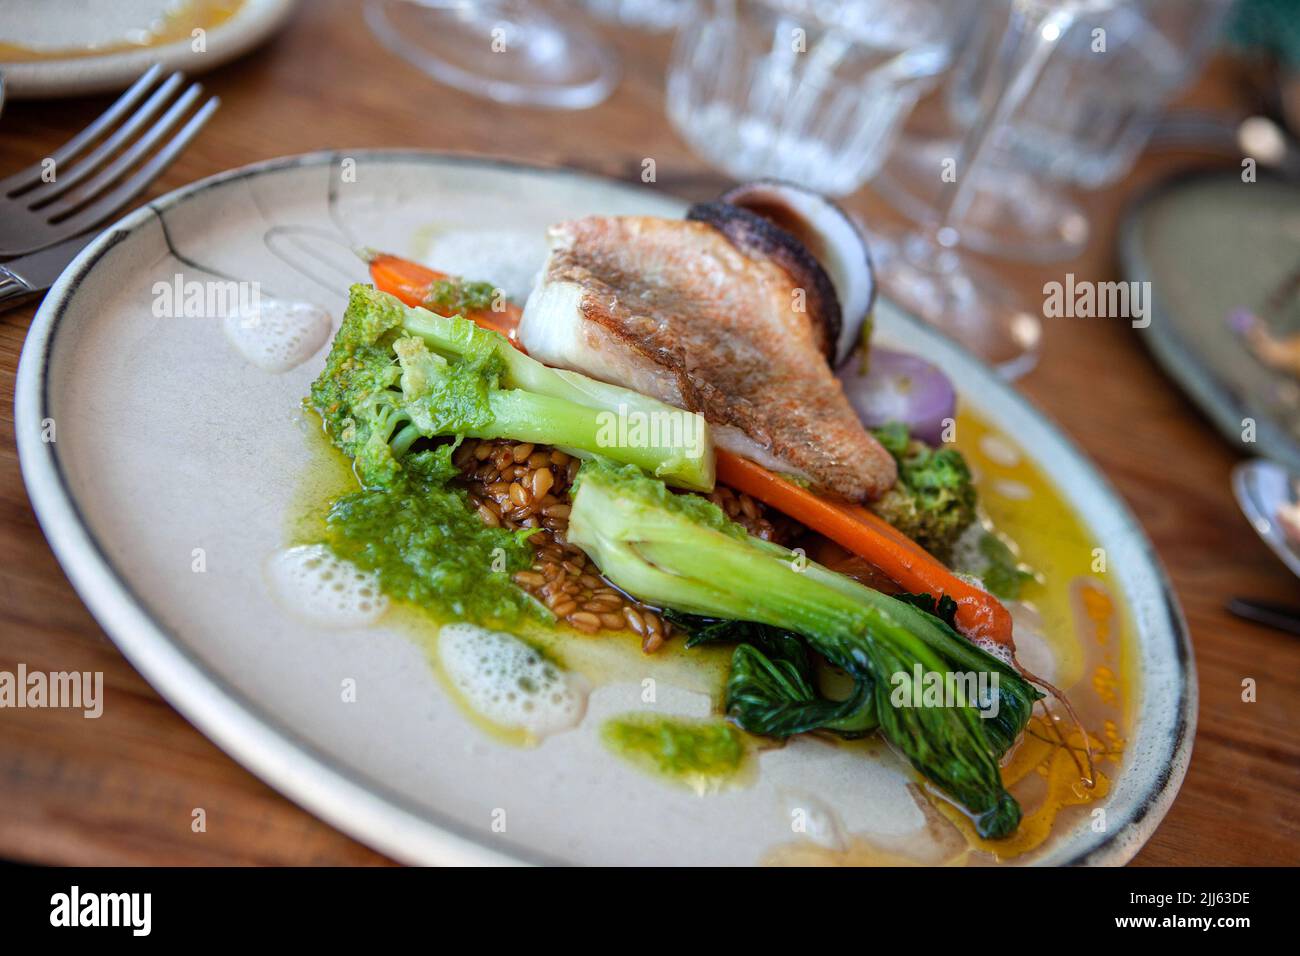 Sea bream fillet with vegetables and risotto Stock Photo